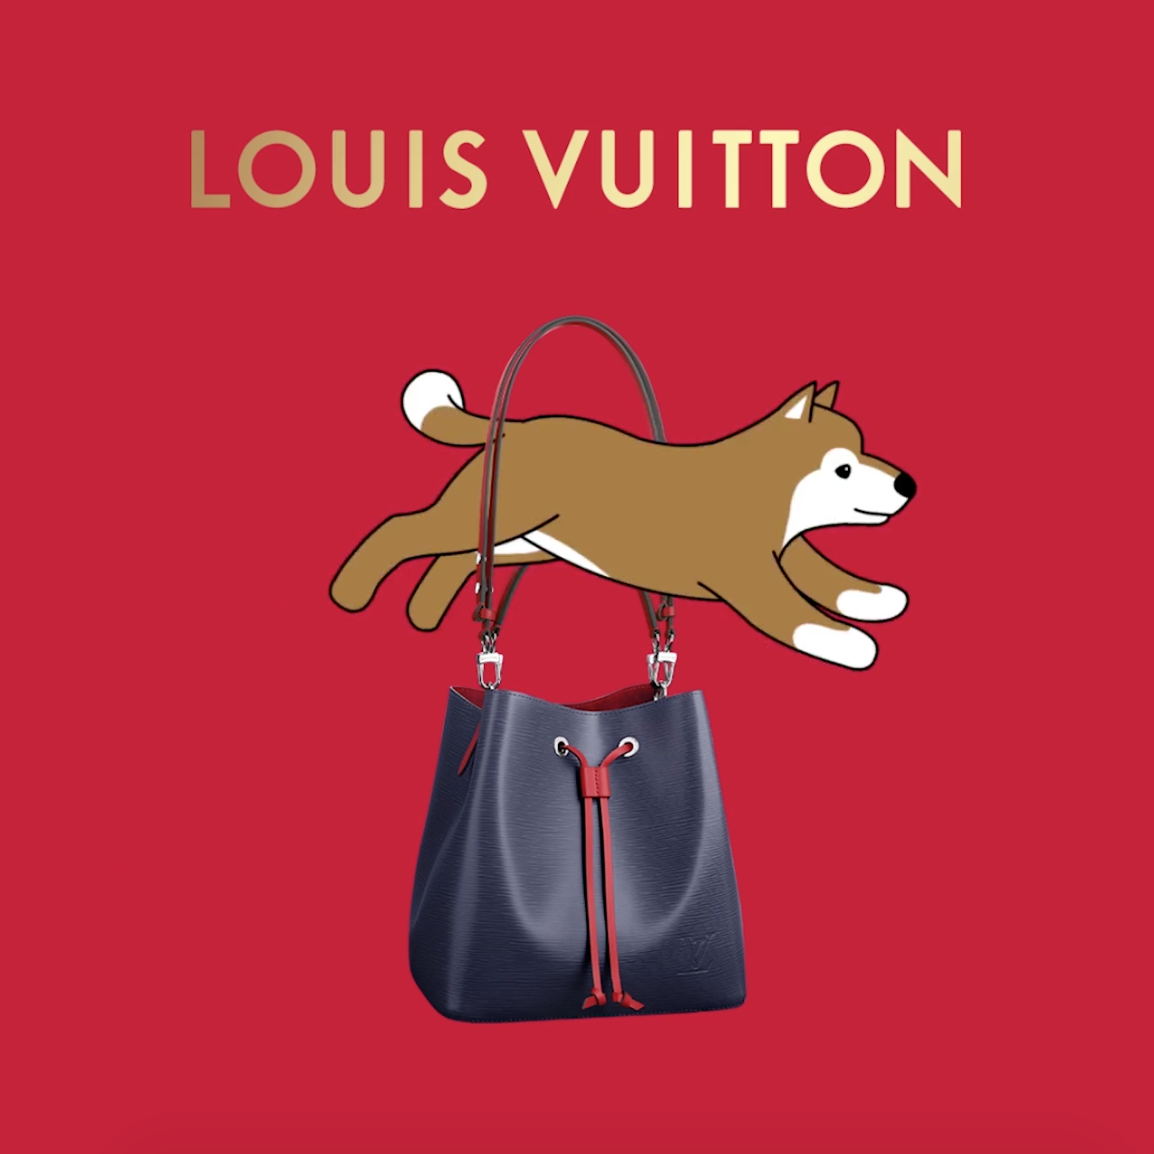 LOUIS VUITTON - Louis Vuitton - Values HAPPY LUNAR YEAR TO ALL CHINESE  COMMUNITIES OVER THE WORLD